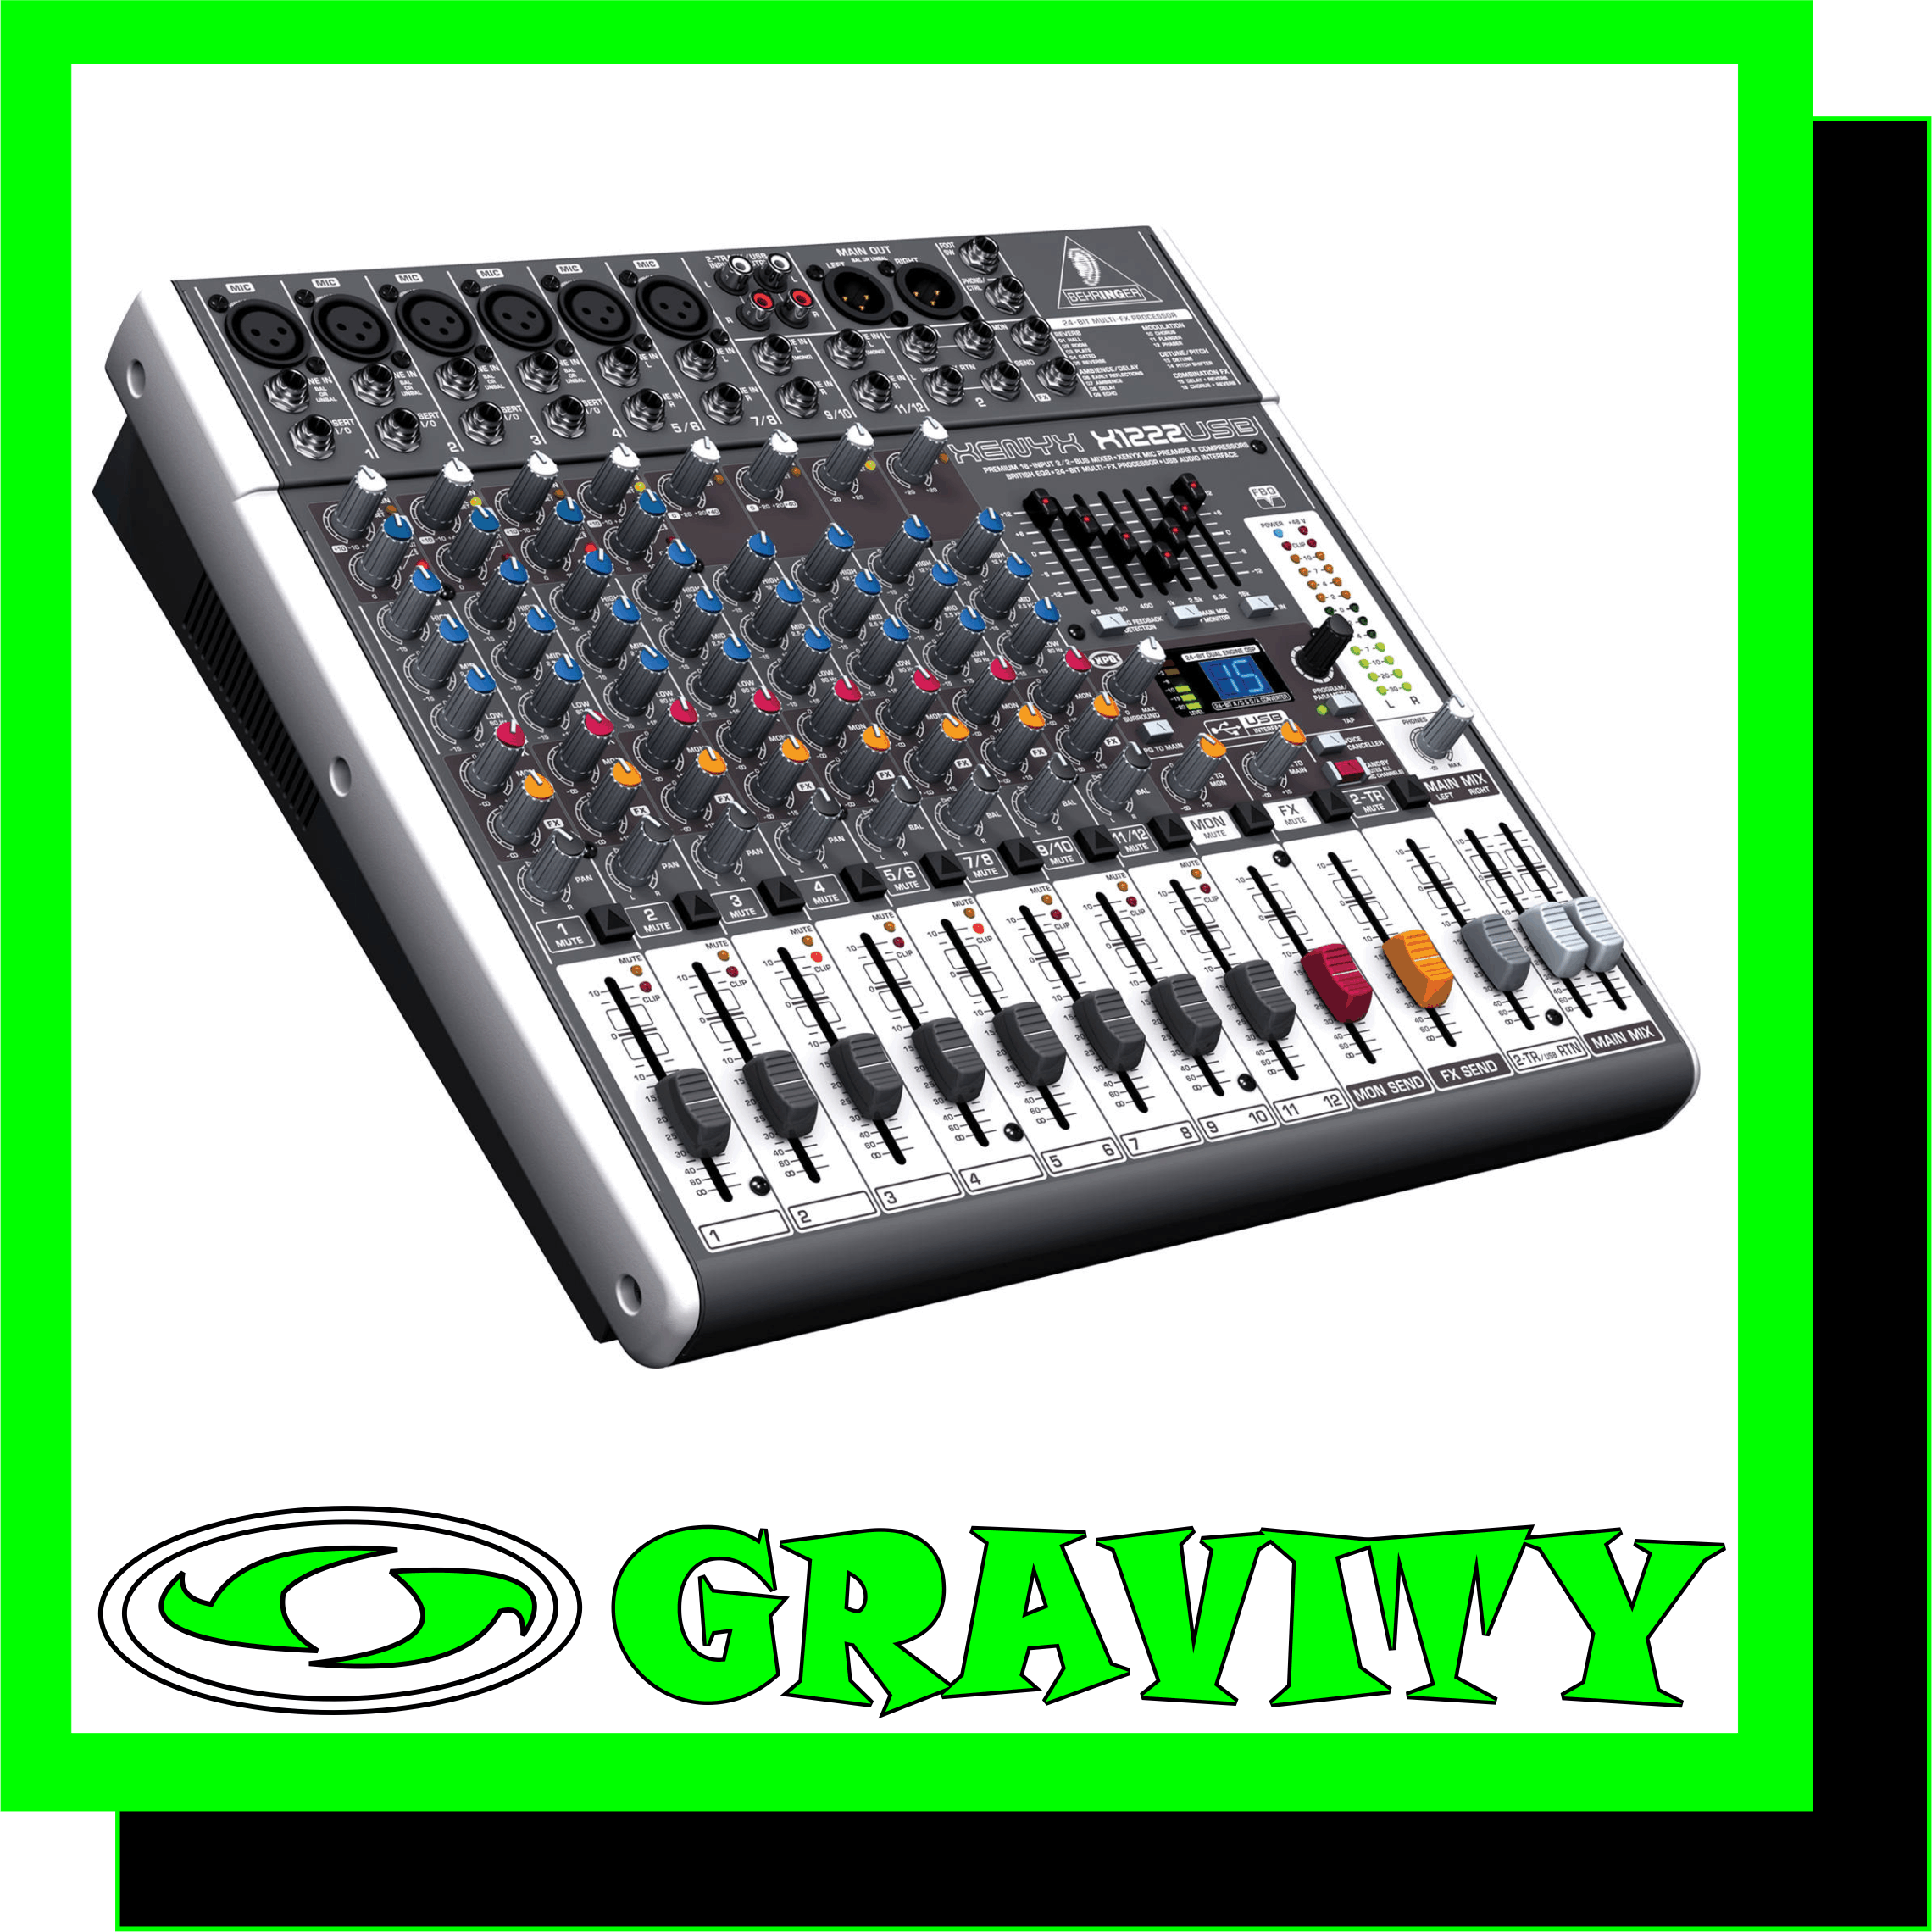 Behringer XENYX X1222USB 16-Input 2/2-Bus Mixer  The compact XENYX X1222USB mixer allows you to effortlessly achieve premium-quality sound. Channels 1 - 4 feature our XENYX Mic Preamps, renowned for their pristine performance, plus 2 of the 4 stereo channels accept XLR inputs, as well as Line-Level sources. All mono channels get our ultra-musical British 3-band EQs and easyto- use one-knob compressors for the ultimate in punch and clarity. Add to this our 24-bit, dual engine Multi-FX processor with 16 editable, professional-grade presets that include reverb, chorus, flanger, delay, pitch shifter and multi-effects and the X1222USB becomes an incredibly versatile mixer for your live performances. But the XENYX X1222USB wasnt just designed to handle your live gigs; it also provides the state-of-the-art tools you need to make stunning, professional-quality recordings. Along with their built-in USB/audio interfaces, the XENYX X1222USB comes with all the recording and editing software needed to turn your computer system into a complete, high-performance home recording studio.